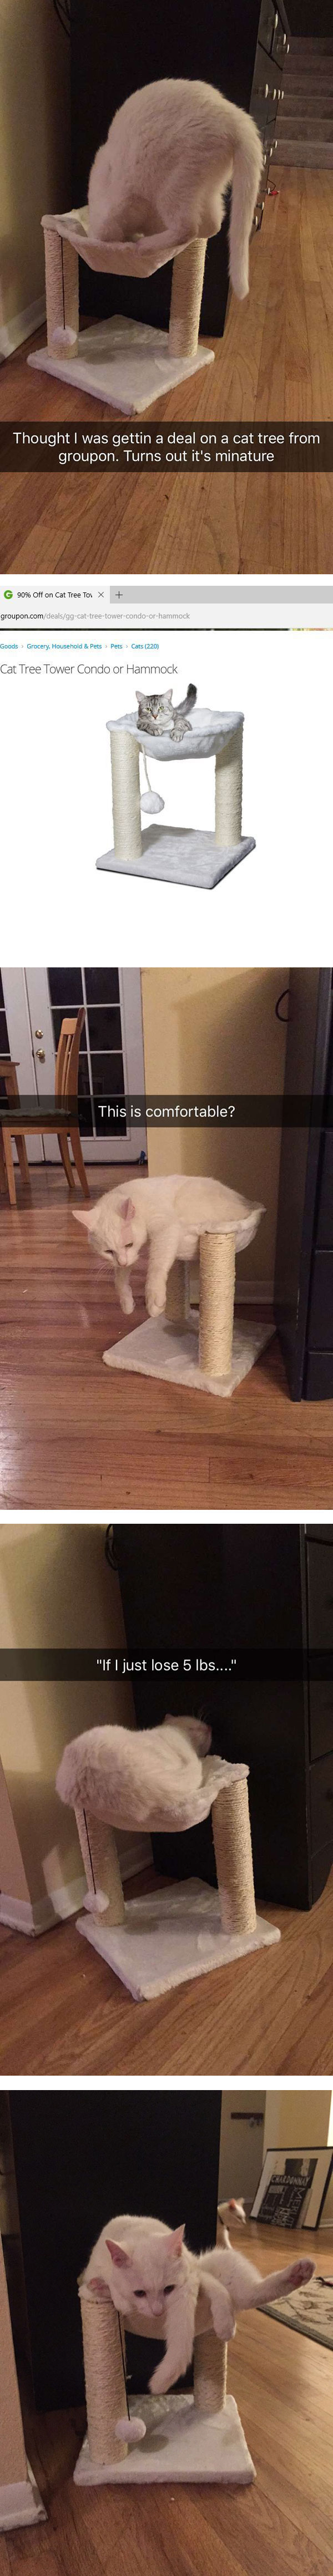 My cat tried his damnedest to fit in this deceivingly undersized cat tree from Groupon